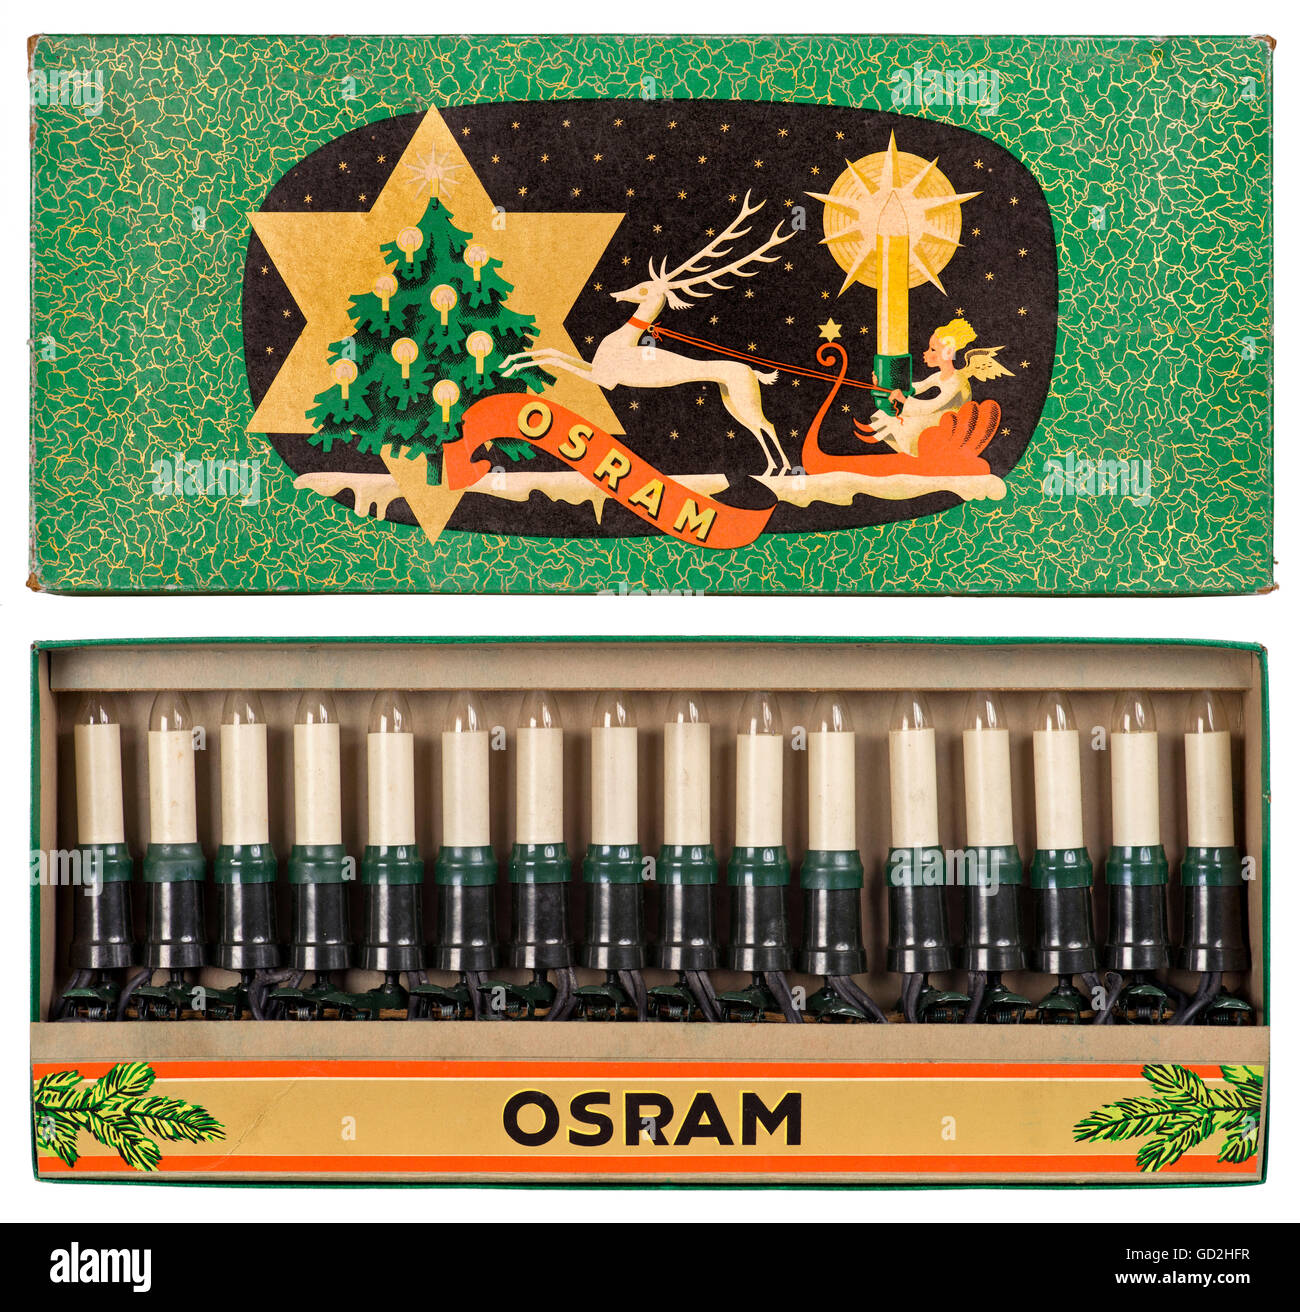 Christmas, Christmas tree illuminations, Osram, fairy lights in original packing, Germany, circa 1958, Additional-Rights-Clearences-Not Available Stock Photo